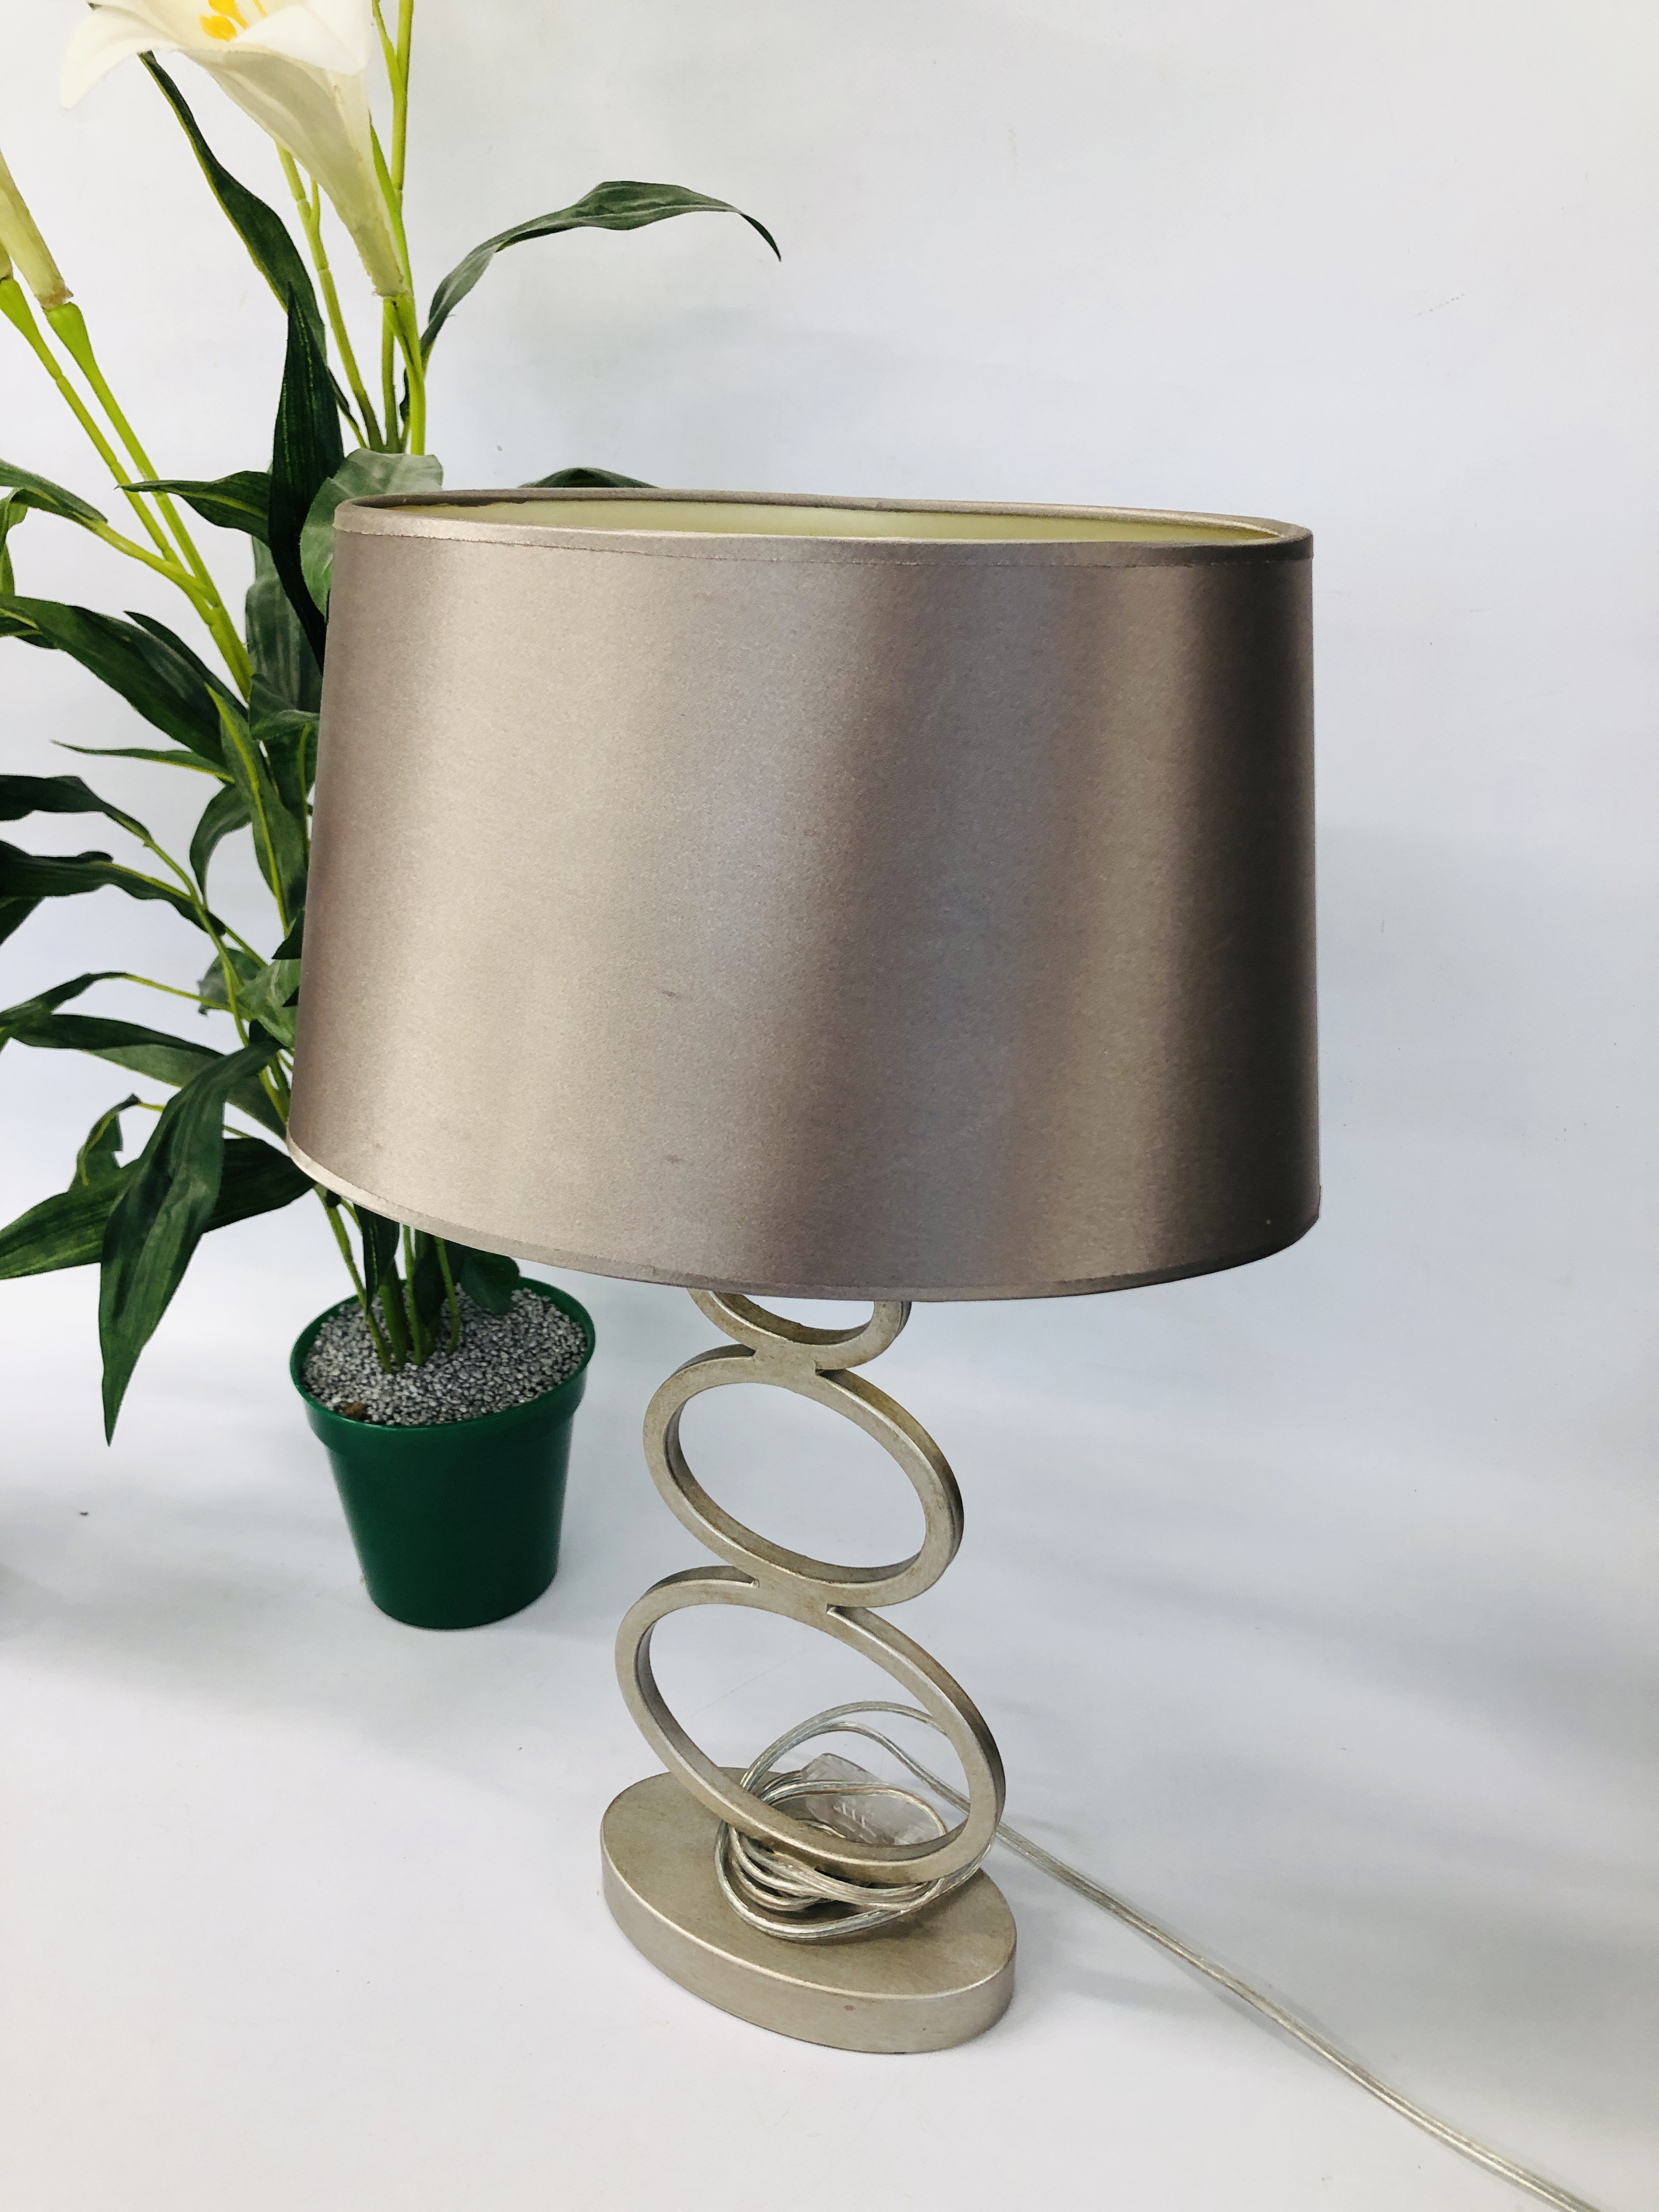 PAIR OF MODERN LAURA ASHLEY TABLE LAMPS AND SHADES ALONG WITH AN ARTIFICIAL LILY ARRANGEMENT - SOLD - Image 2 of 4